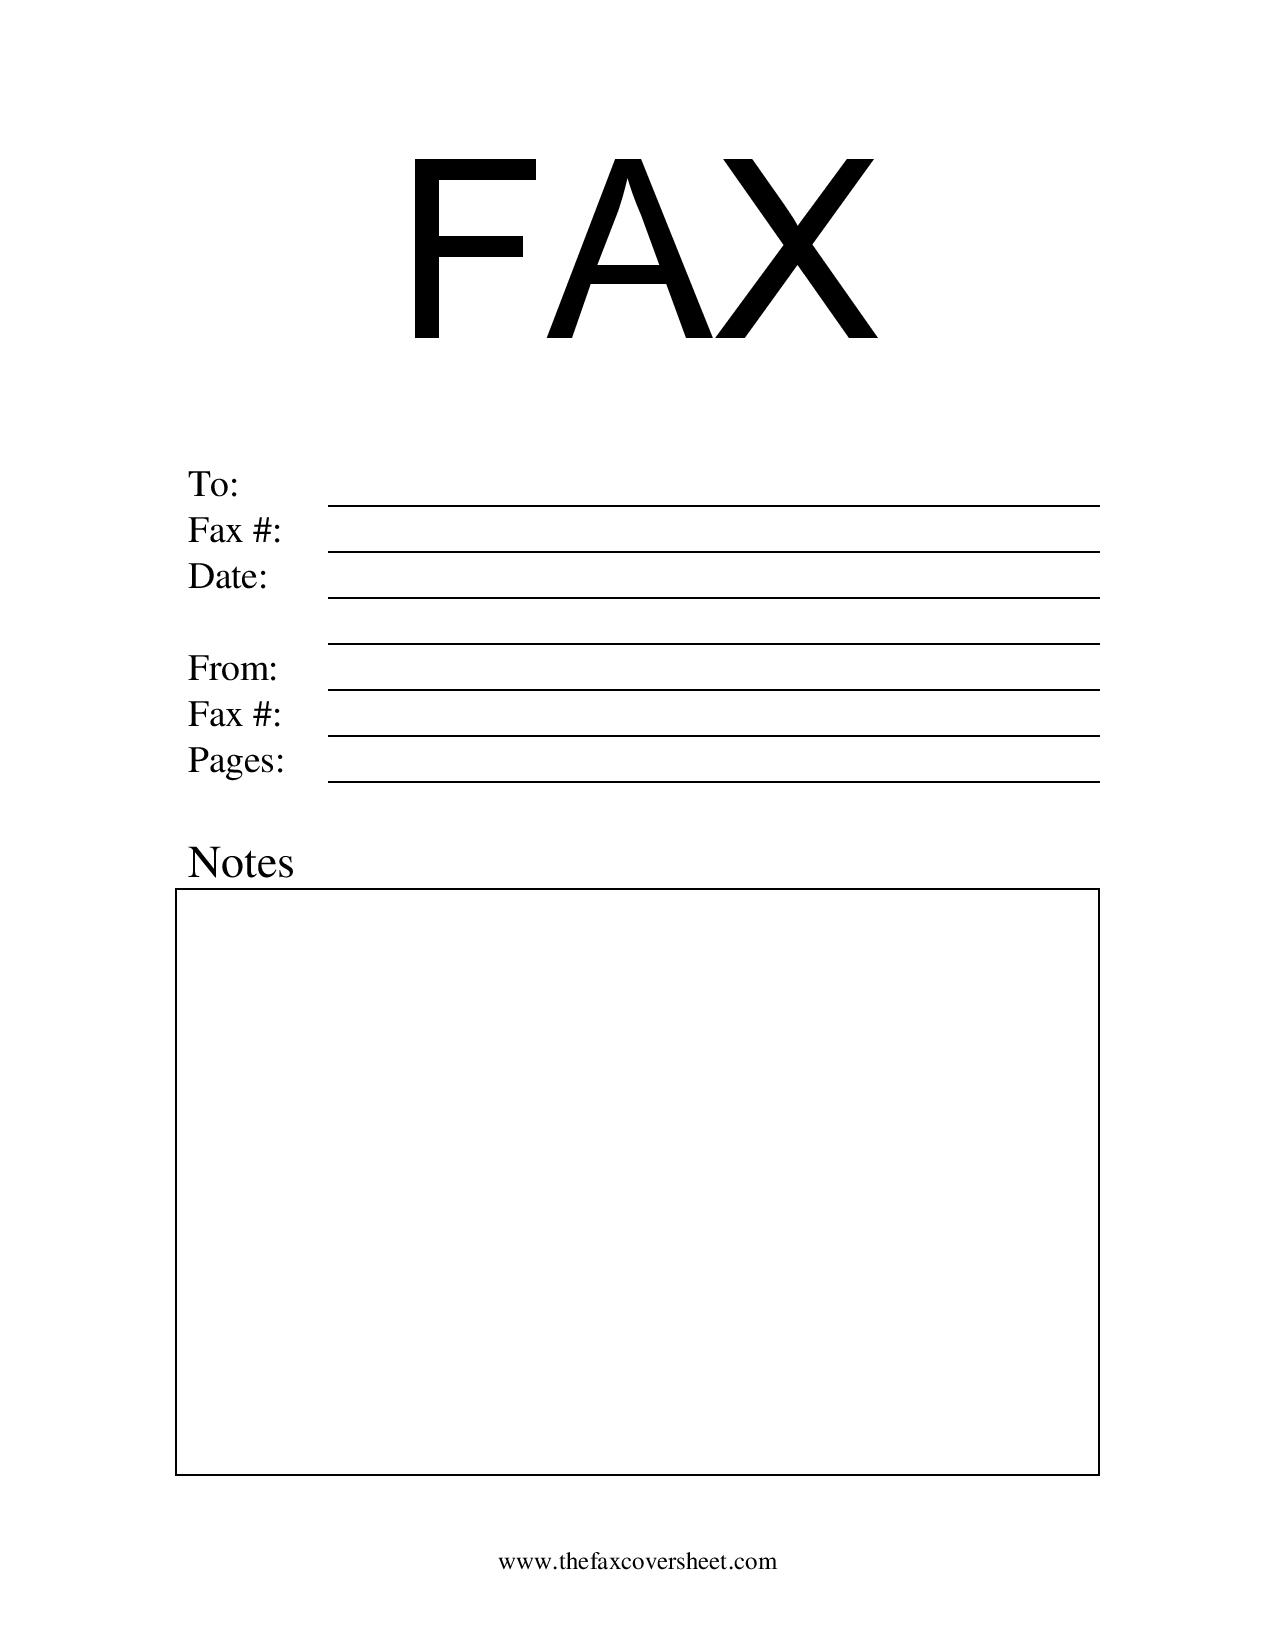 Basic Fax Cover Sheet Free Printable Template Riset